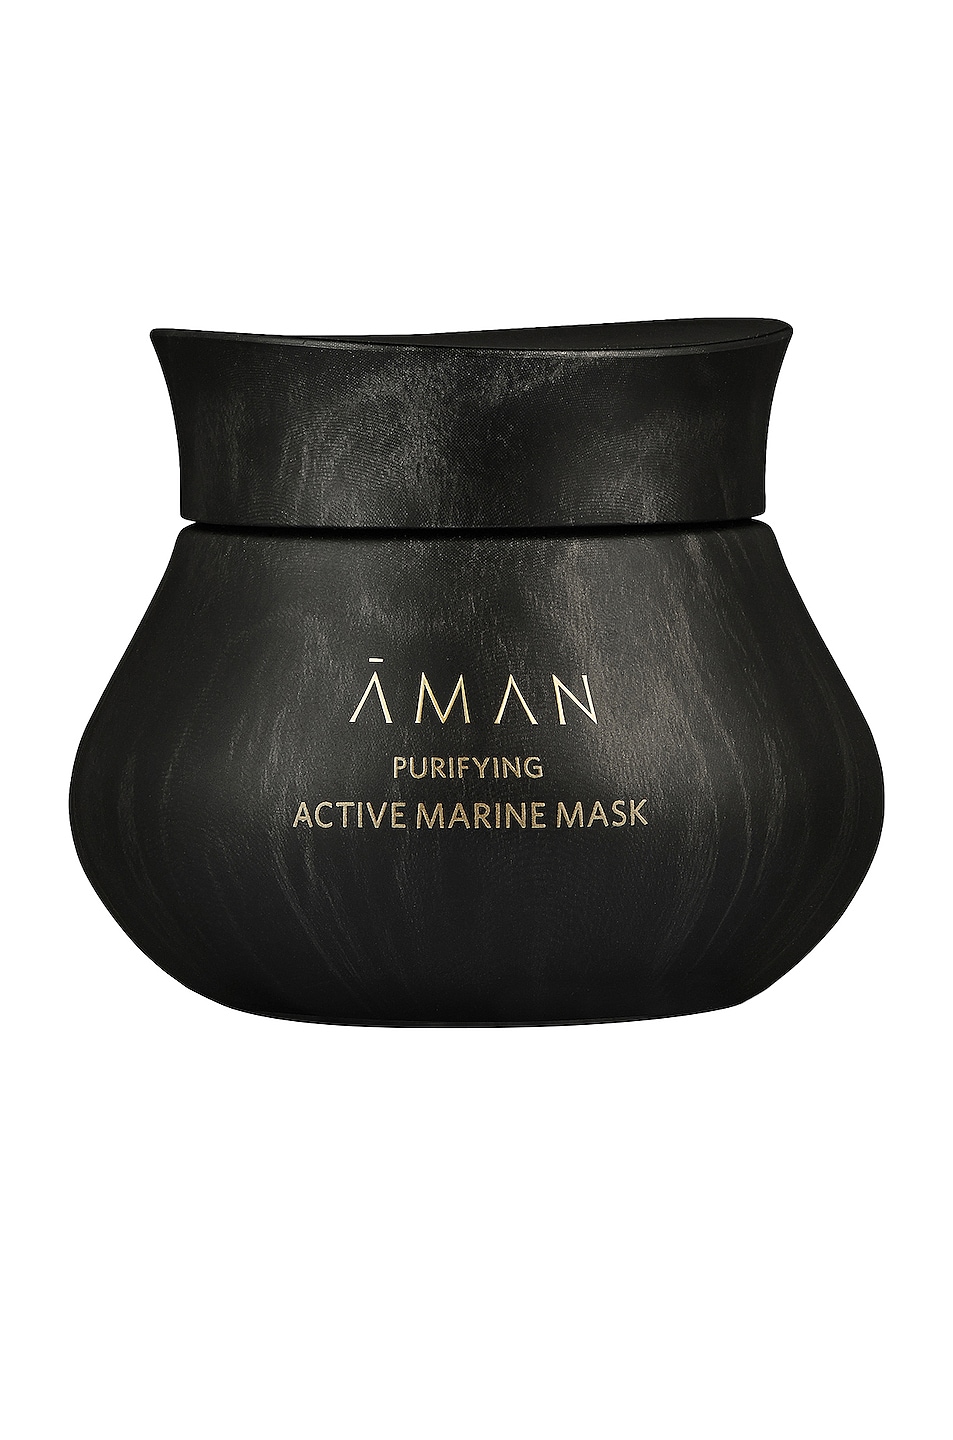 Purifying Active Marine Mask in Beauty: NA